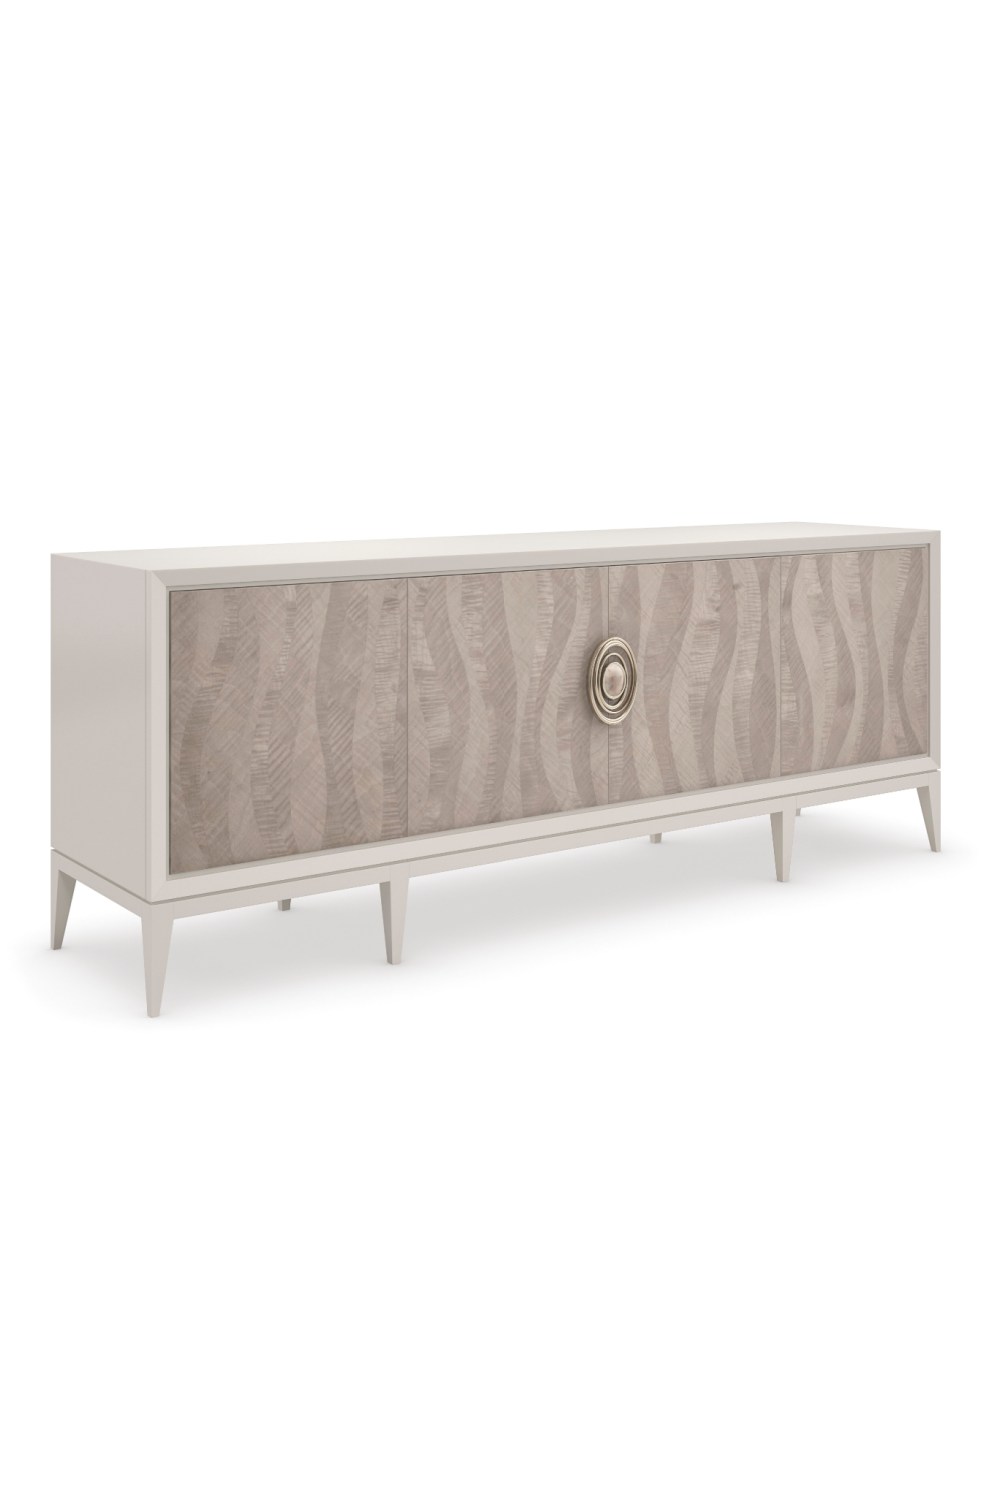 Patterned Cream Modern Sideboard | Caracole Now Streaming | Oroa.com